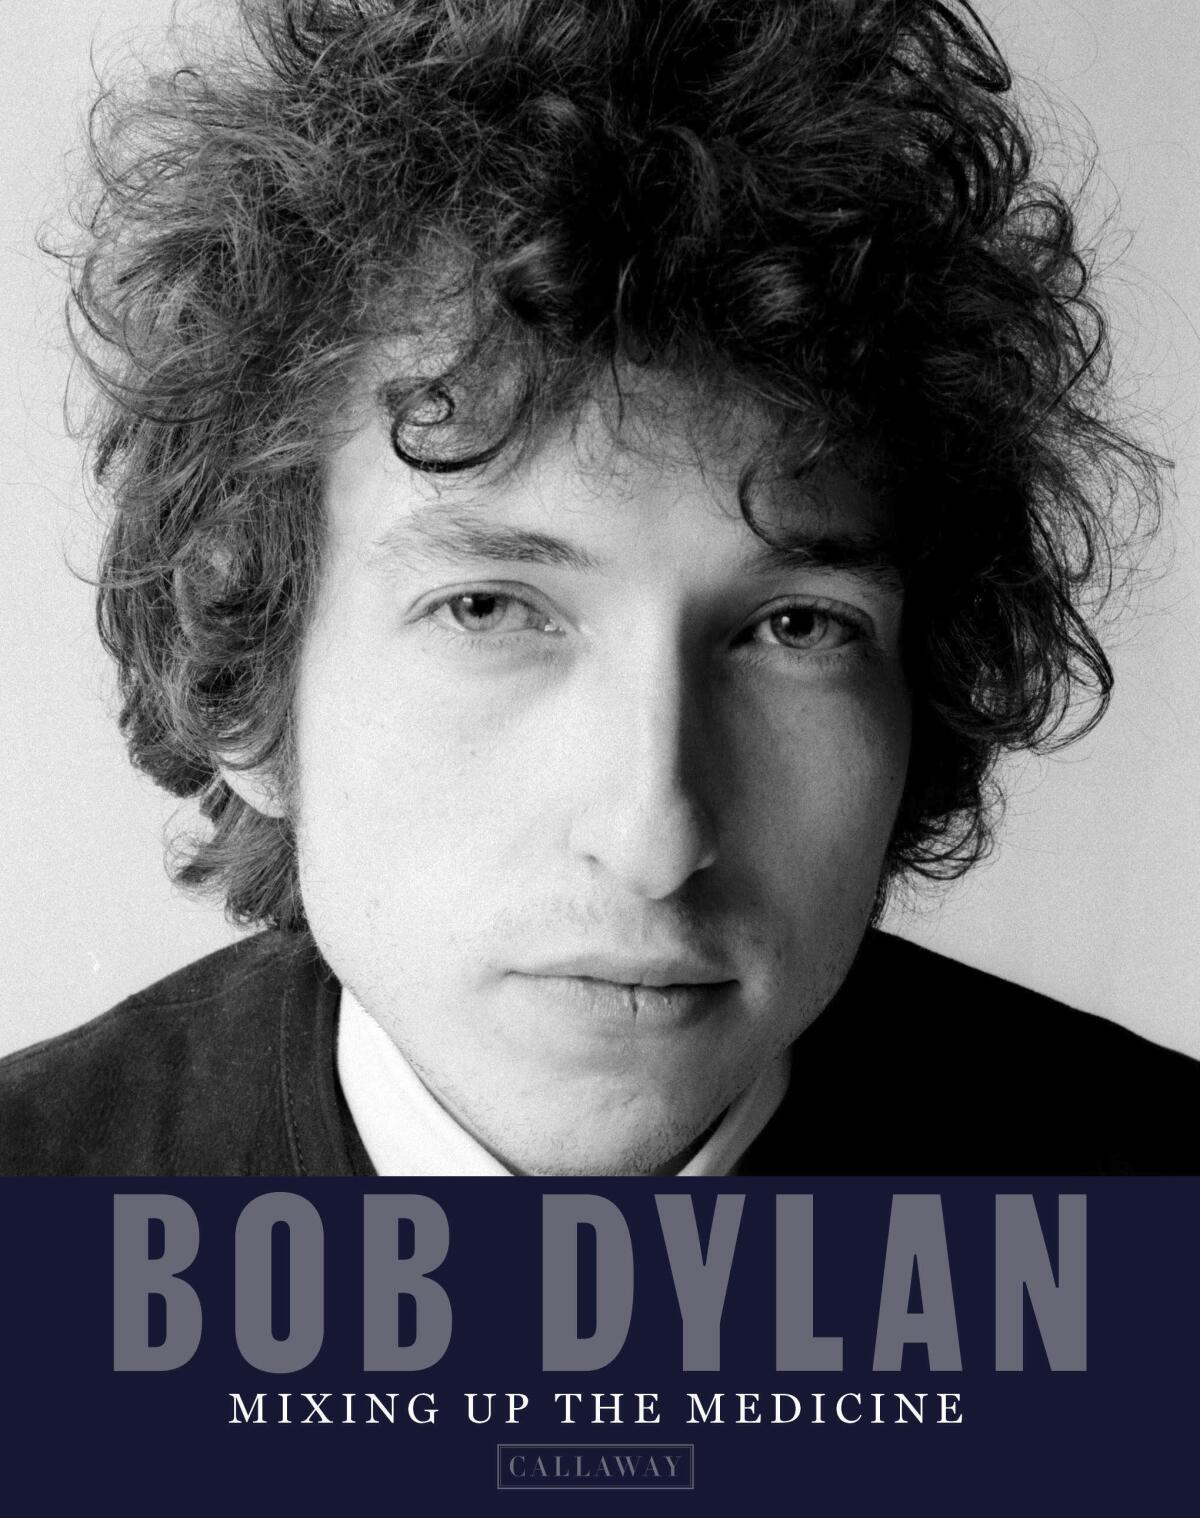 New book on Bob Dylan will feature hundreds of rare images - The